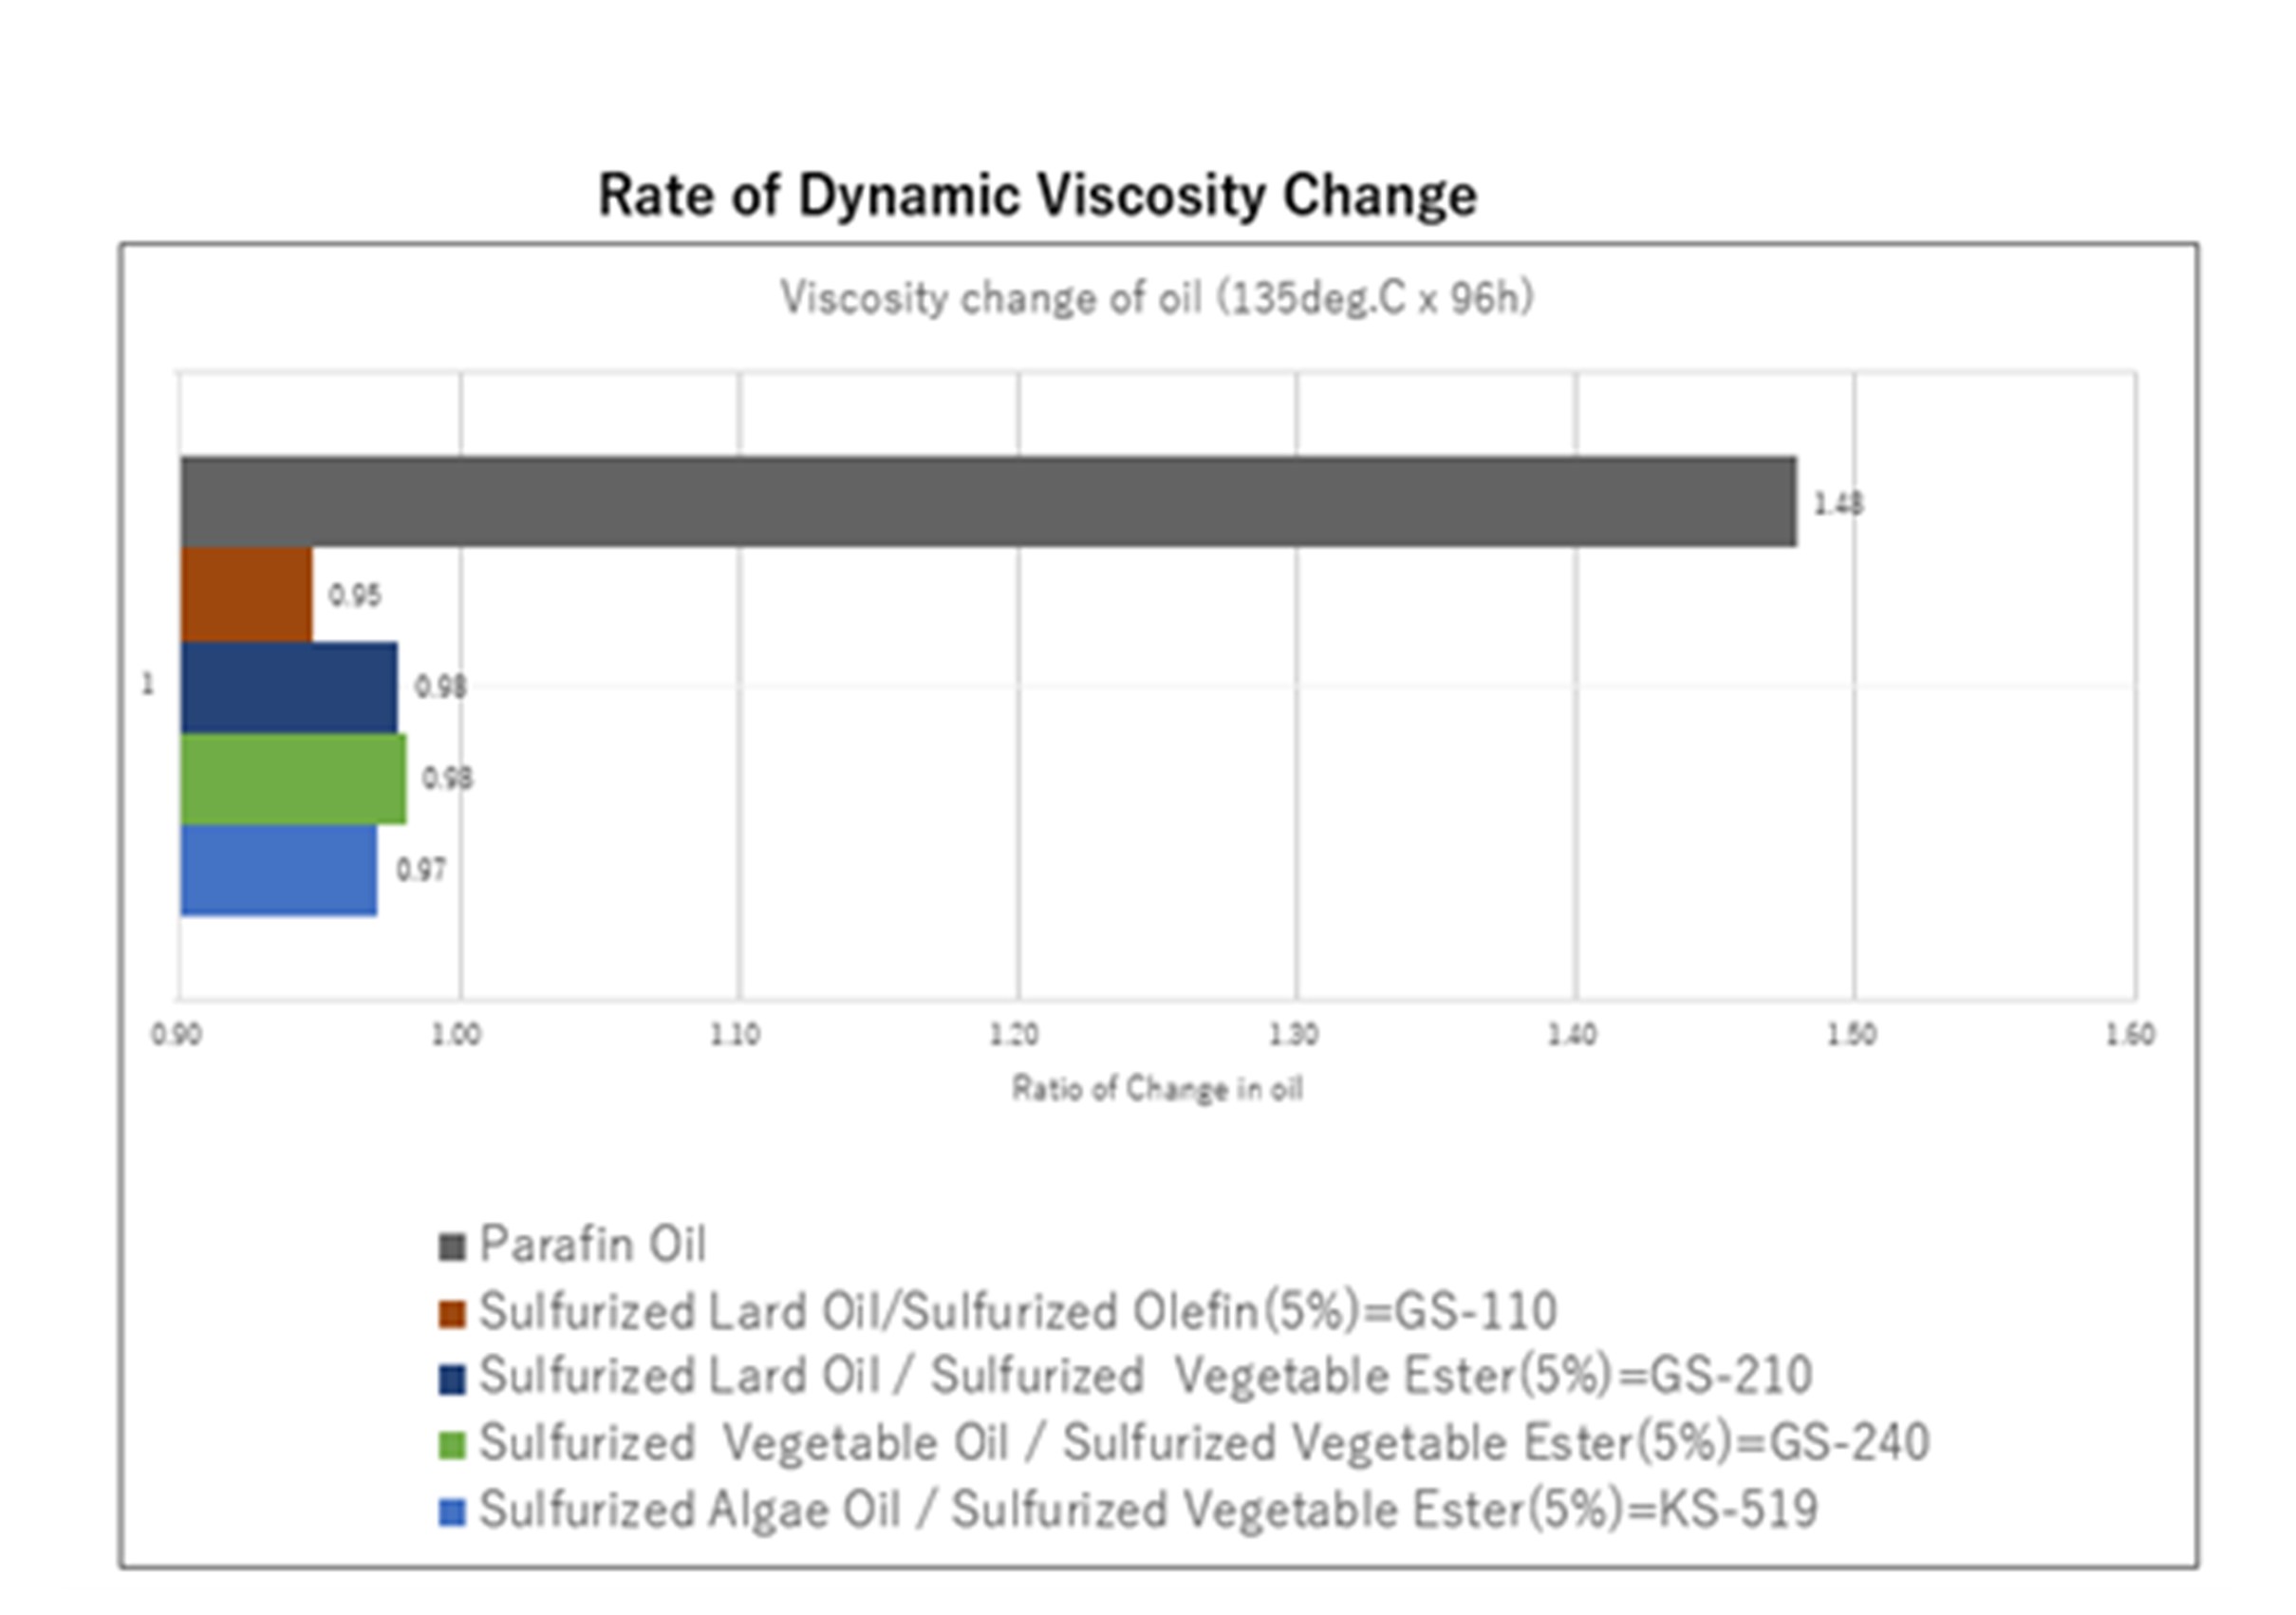 Chart of the rate of Dynamic Viscosity Change